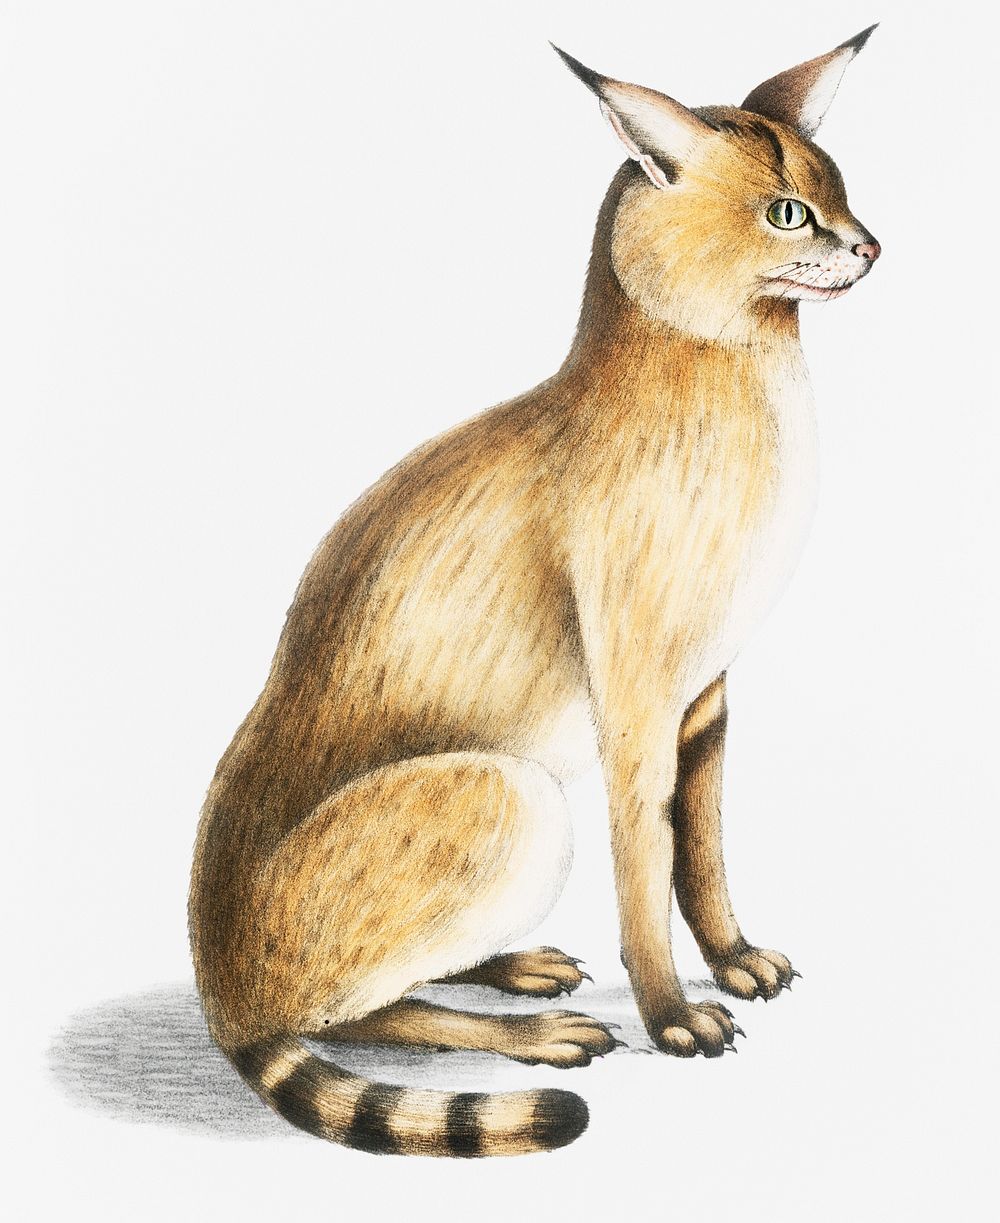 Allied Cat (Felis affinis) from Illustrations of Indian Zoology (1830-1834) by John Edward Gray (1800-1875).